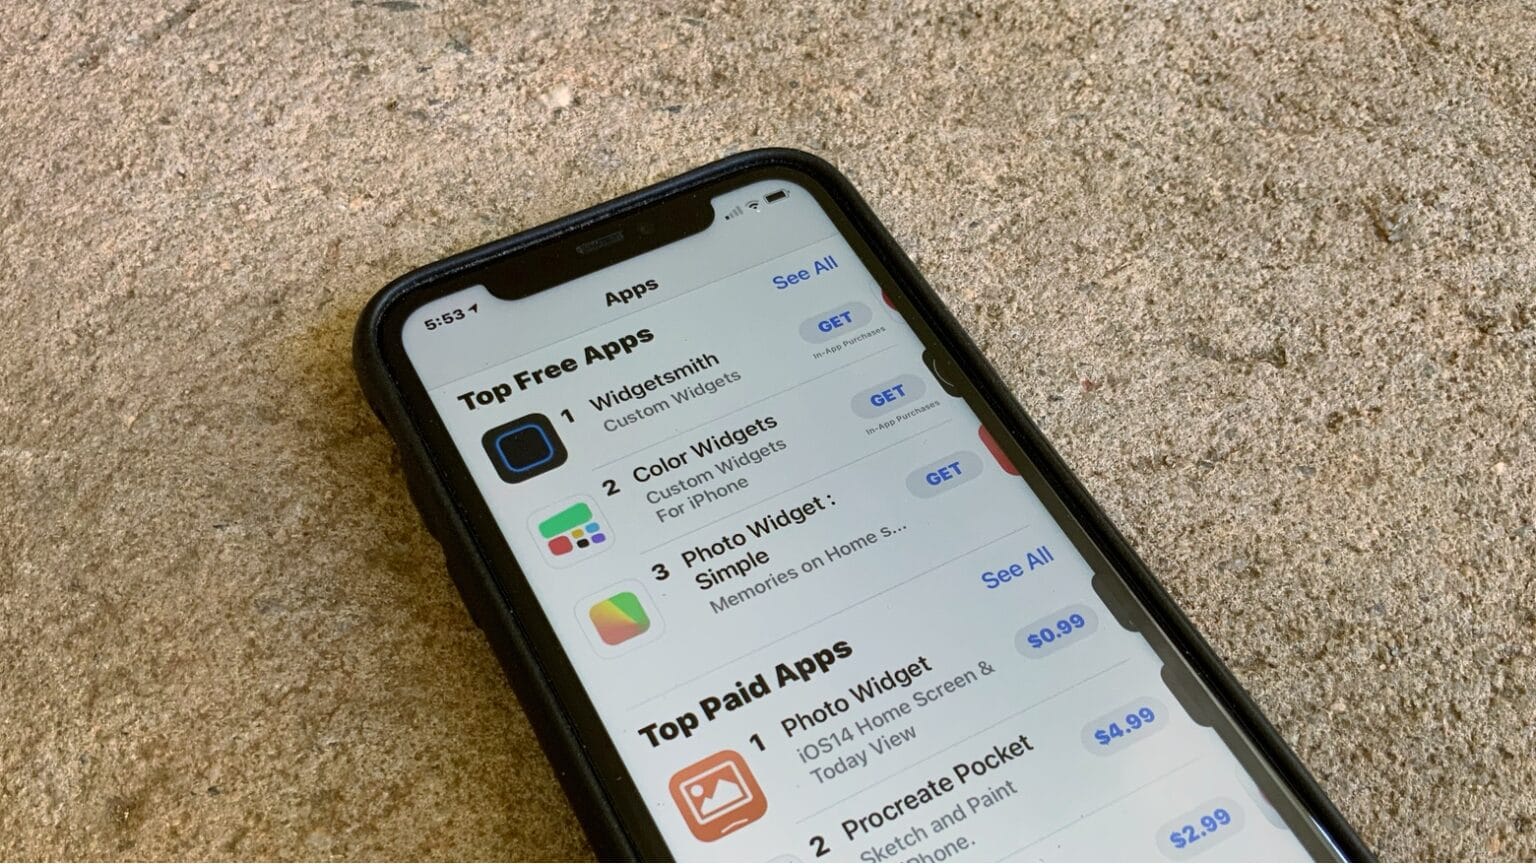 iOS 14 widgets apps shot to the top of the iPhone App Store charts.